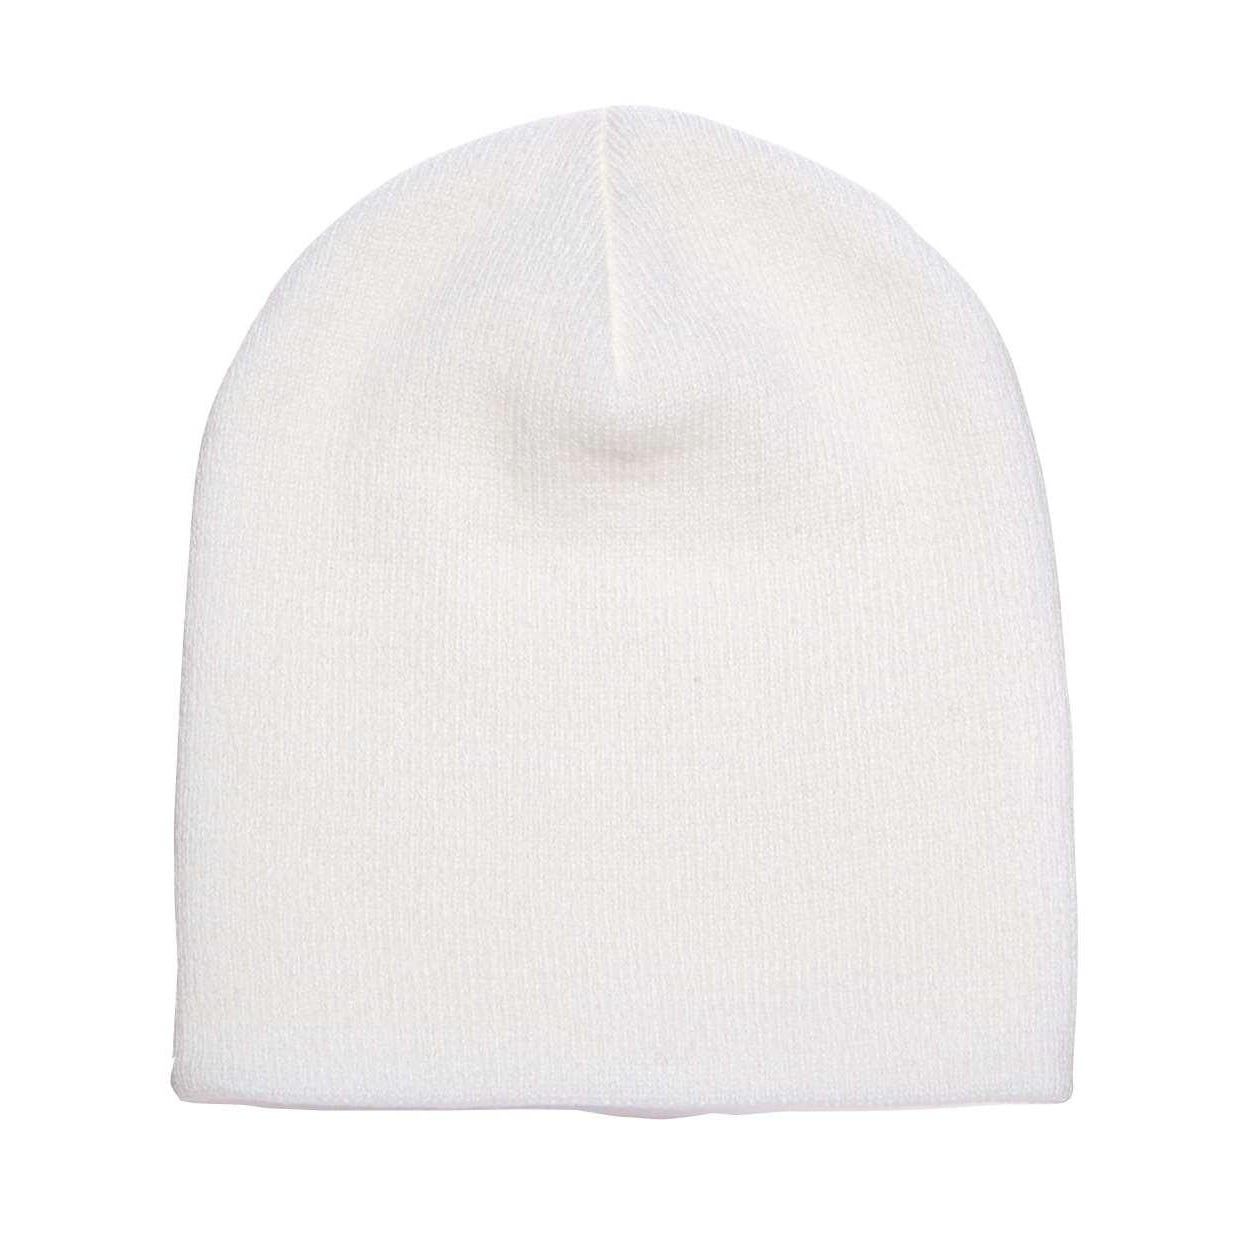 Yupoong 1500 Adult Knit Beanie | Beanies